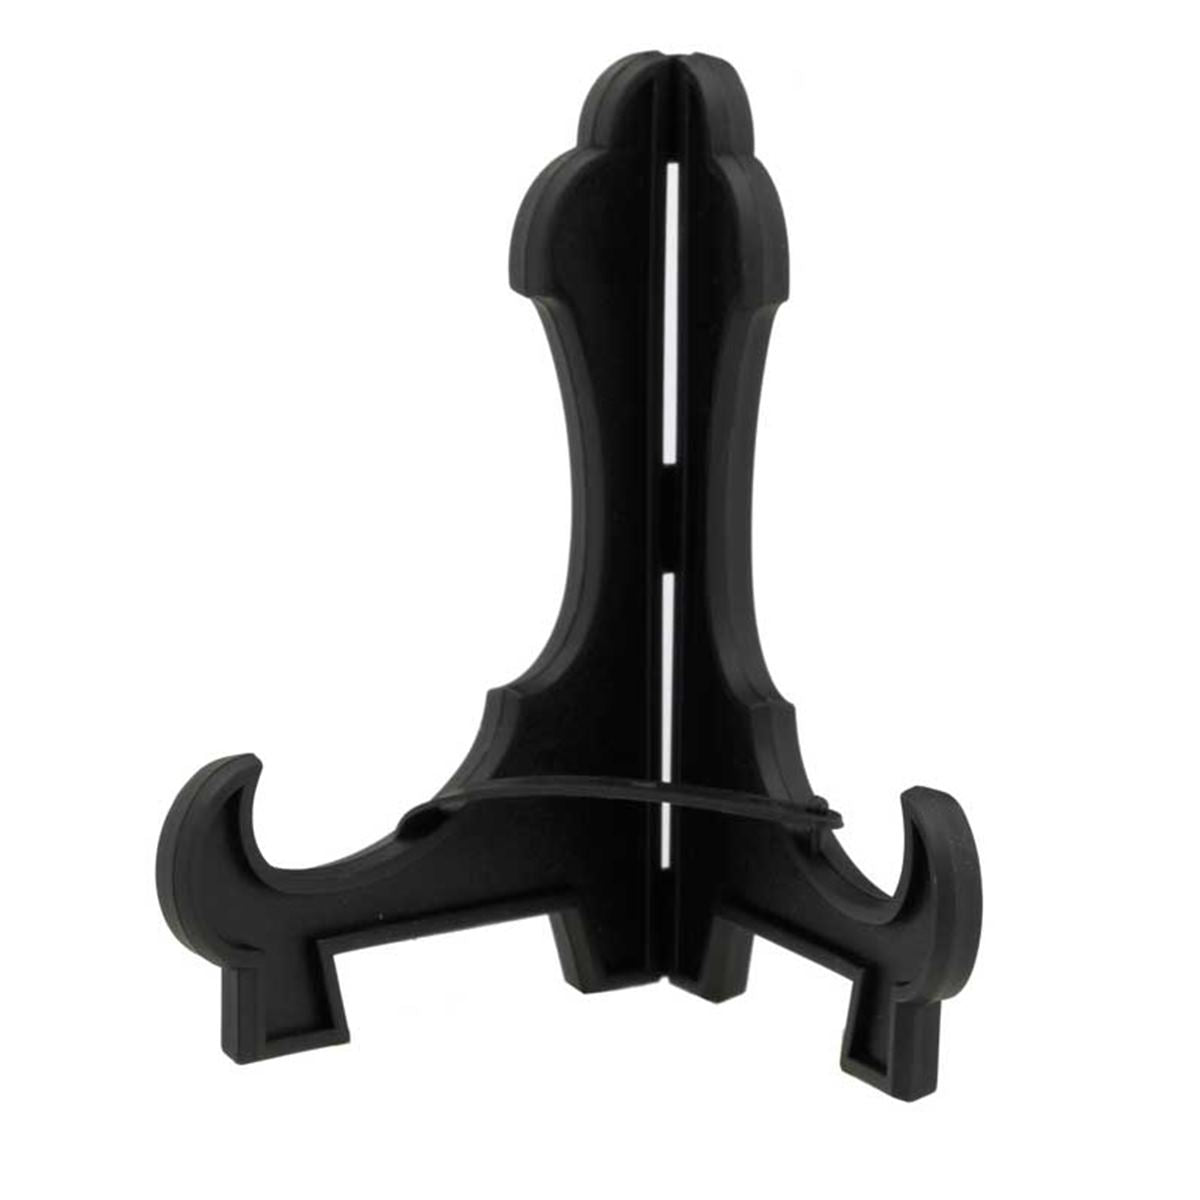 Salver Stand Black - 4 Sizes Available